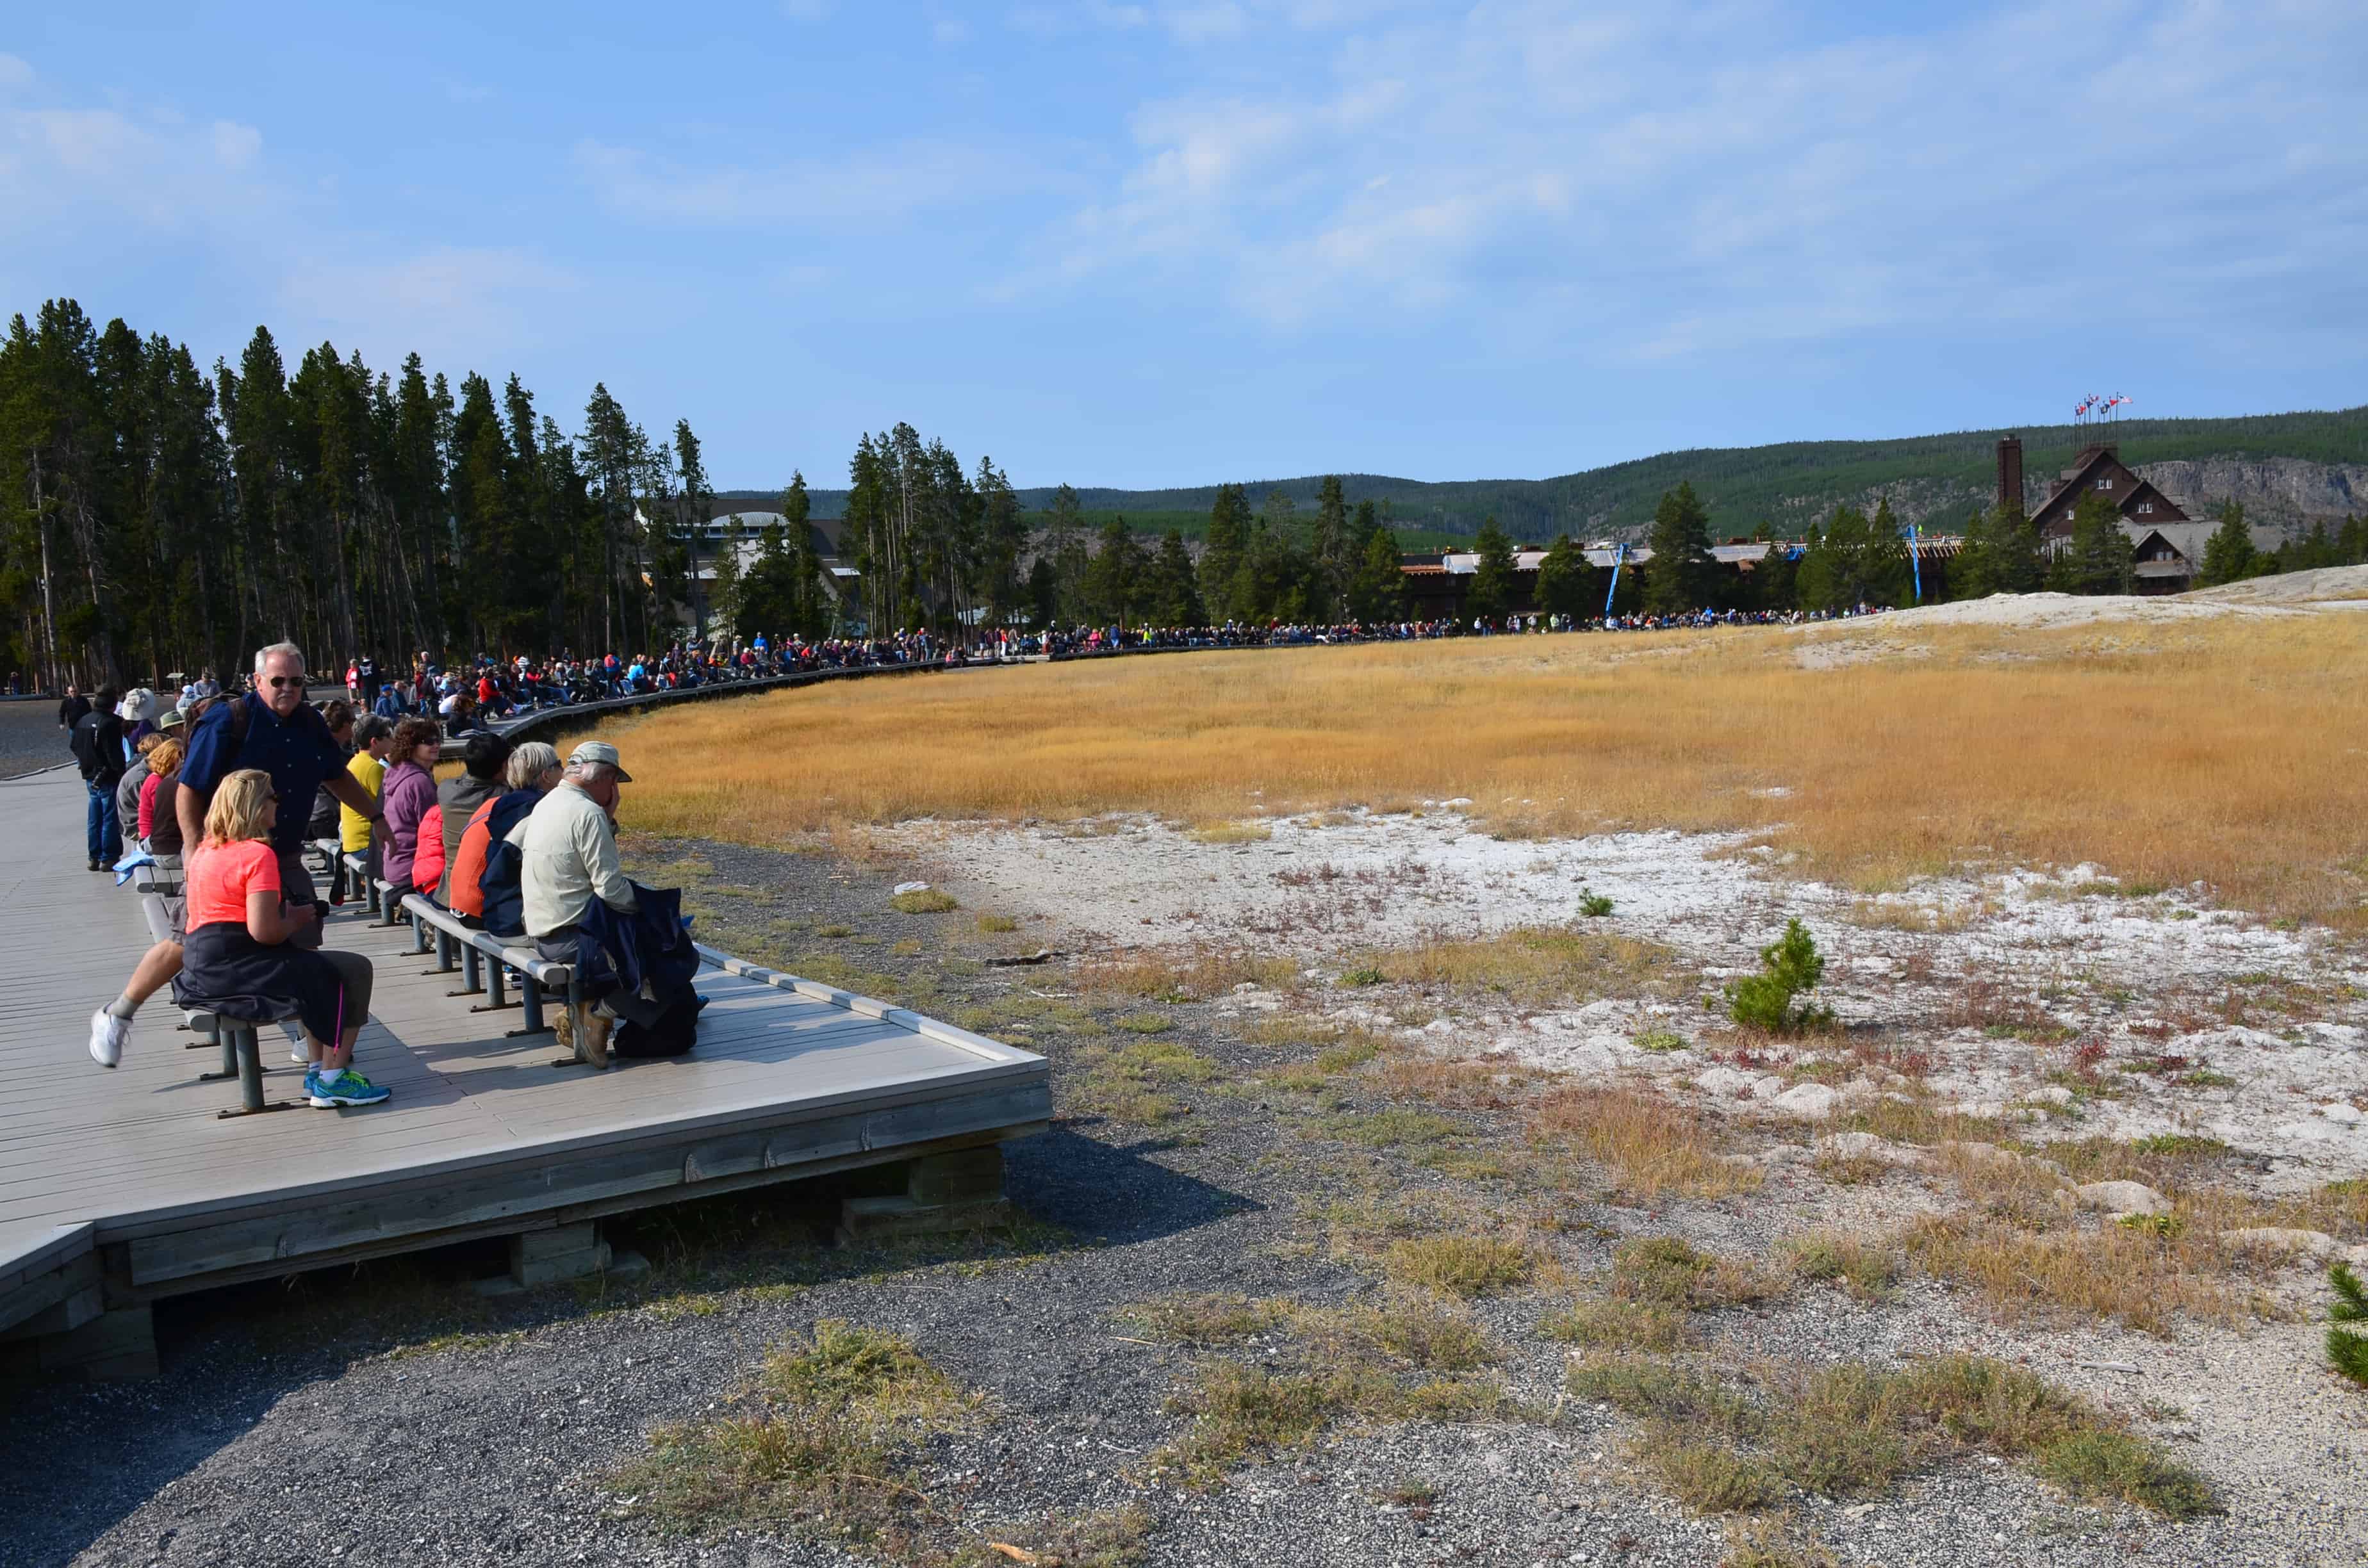 Old Faithful viewing area at the Upper Geyser Basin in Yellowstone National Park, Wyoming